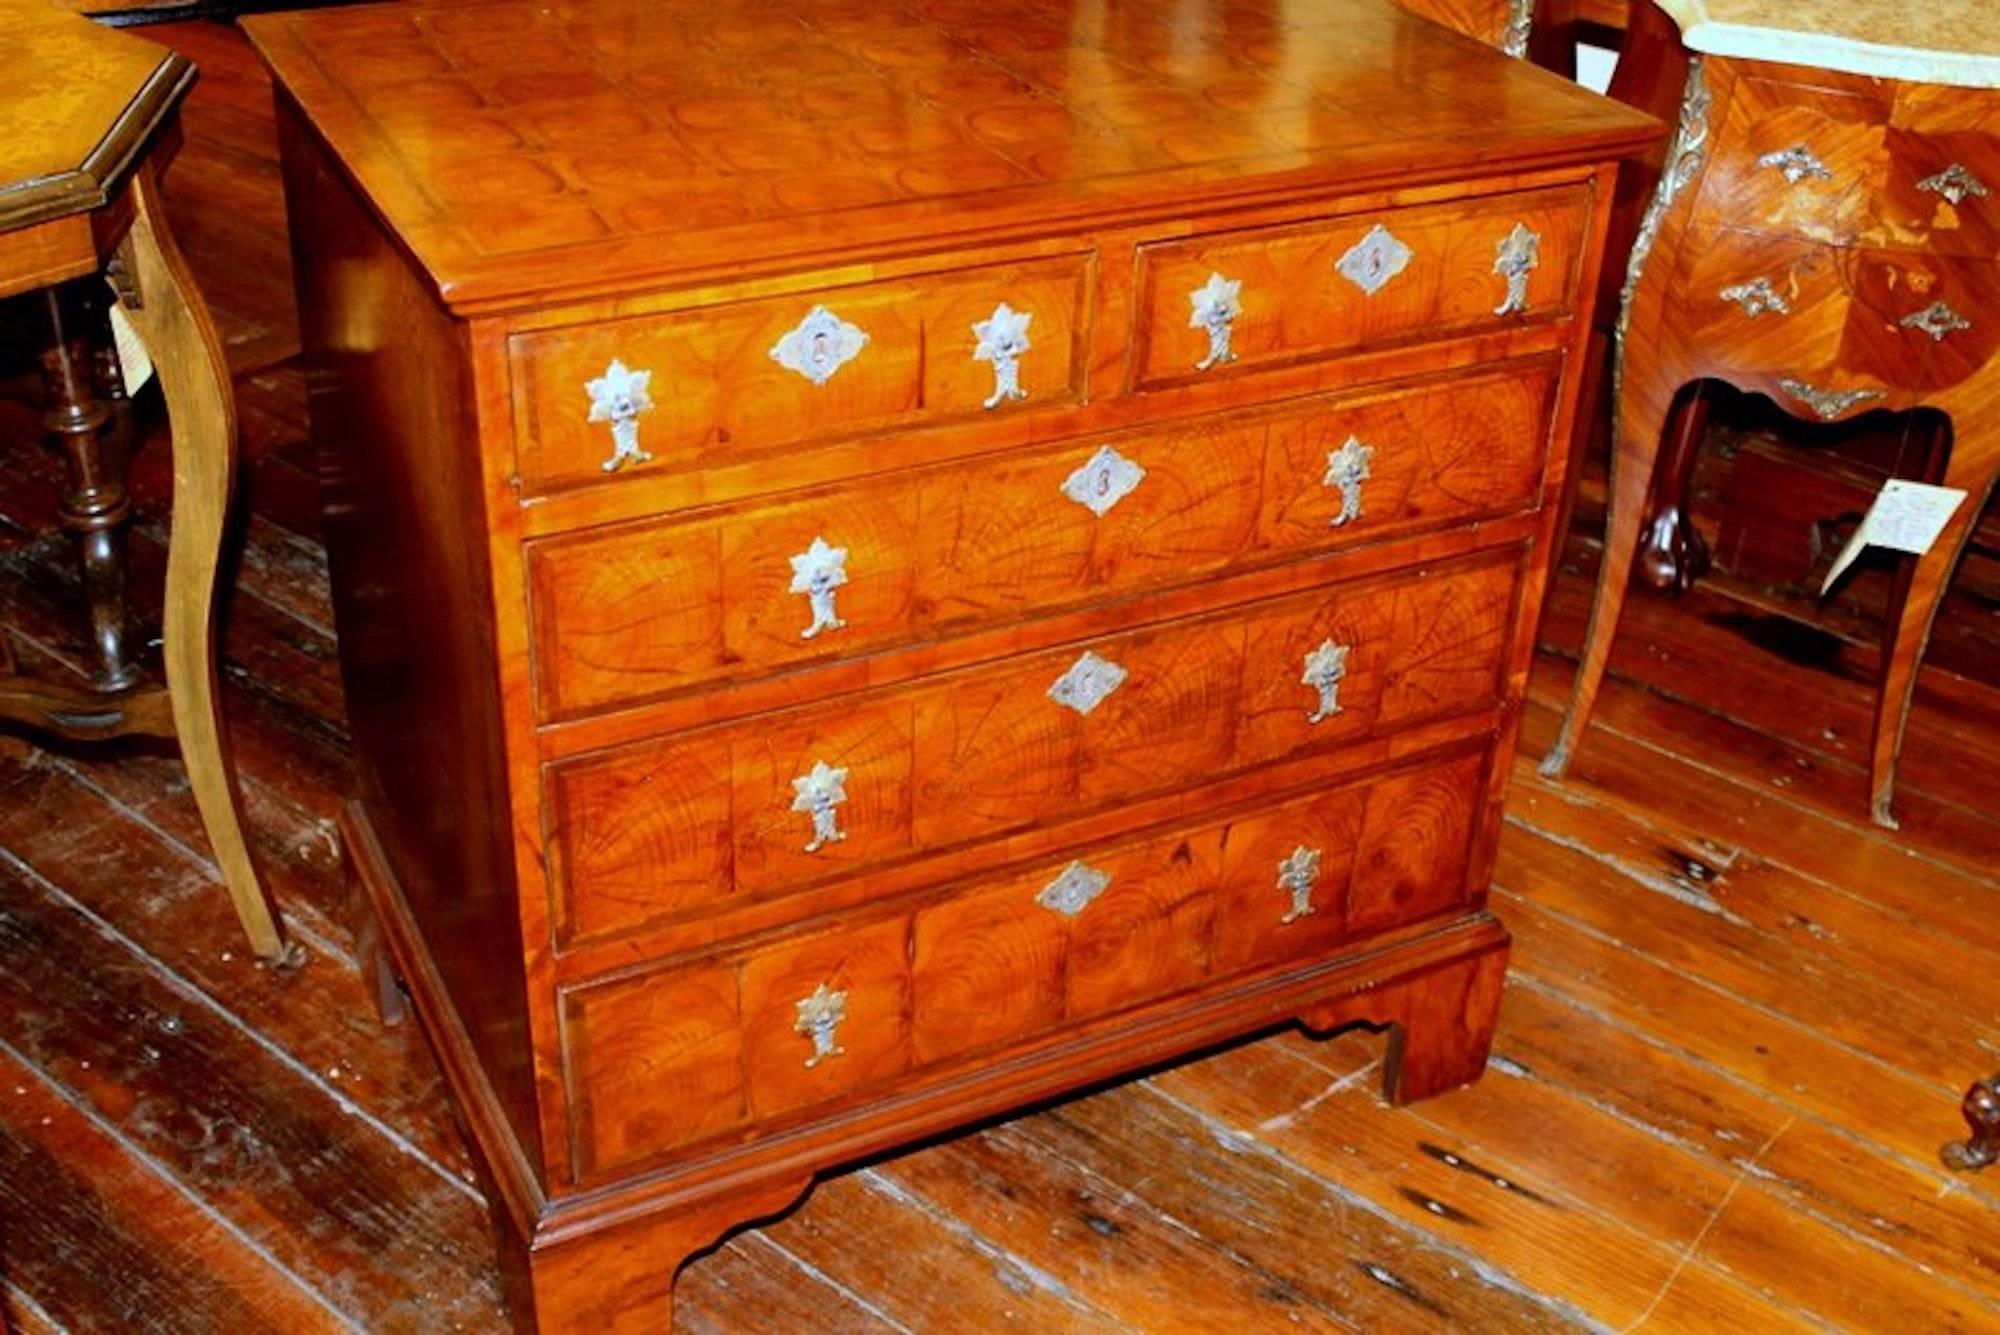 Rare and fine antique English burr elm oyster veneer queen Anne revival bachelor's chest with Herringbone or feather-banded walnut inlay. Please note the exceptional oyster veneers throughout. Pristine condition, circa 1860-1880.

With period